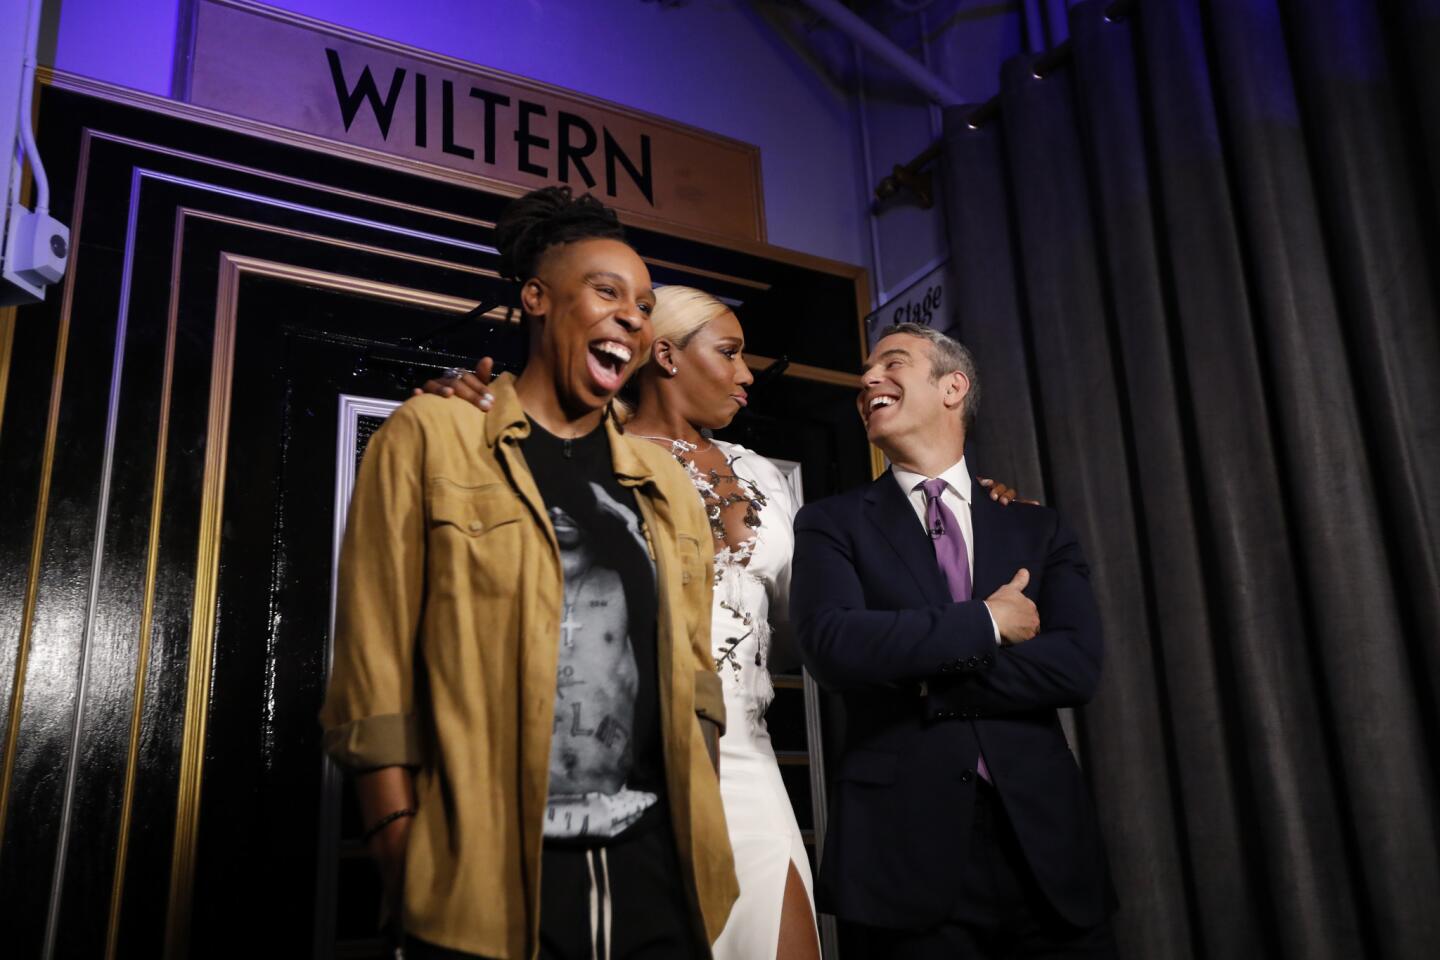 Fans jam a brief L.A. visit by Andy Cohen’s tipsy talk show